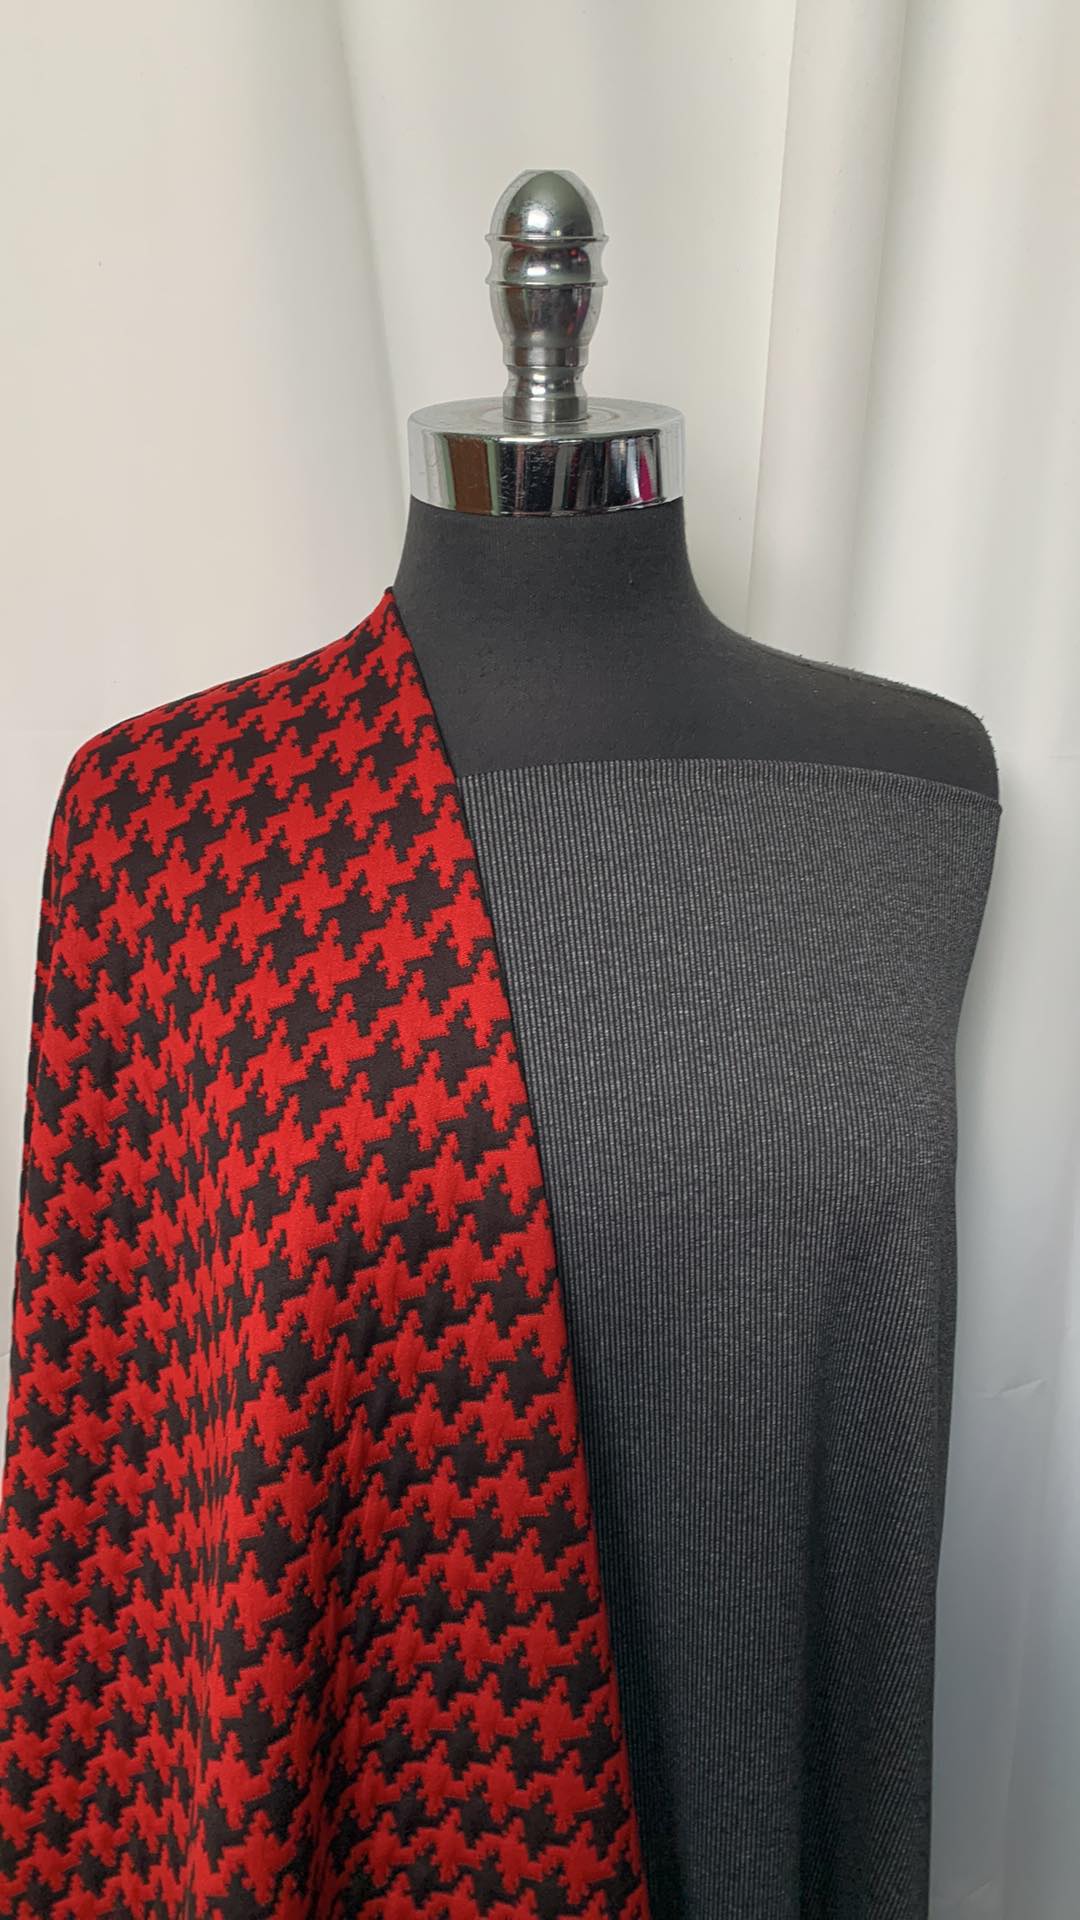 RED HOUNDSTOOTH BUNDLE : 2YD Red/Black Houndstooth Quilted & 2YD Charcoal Top-Weight PF : A2262